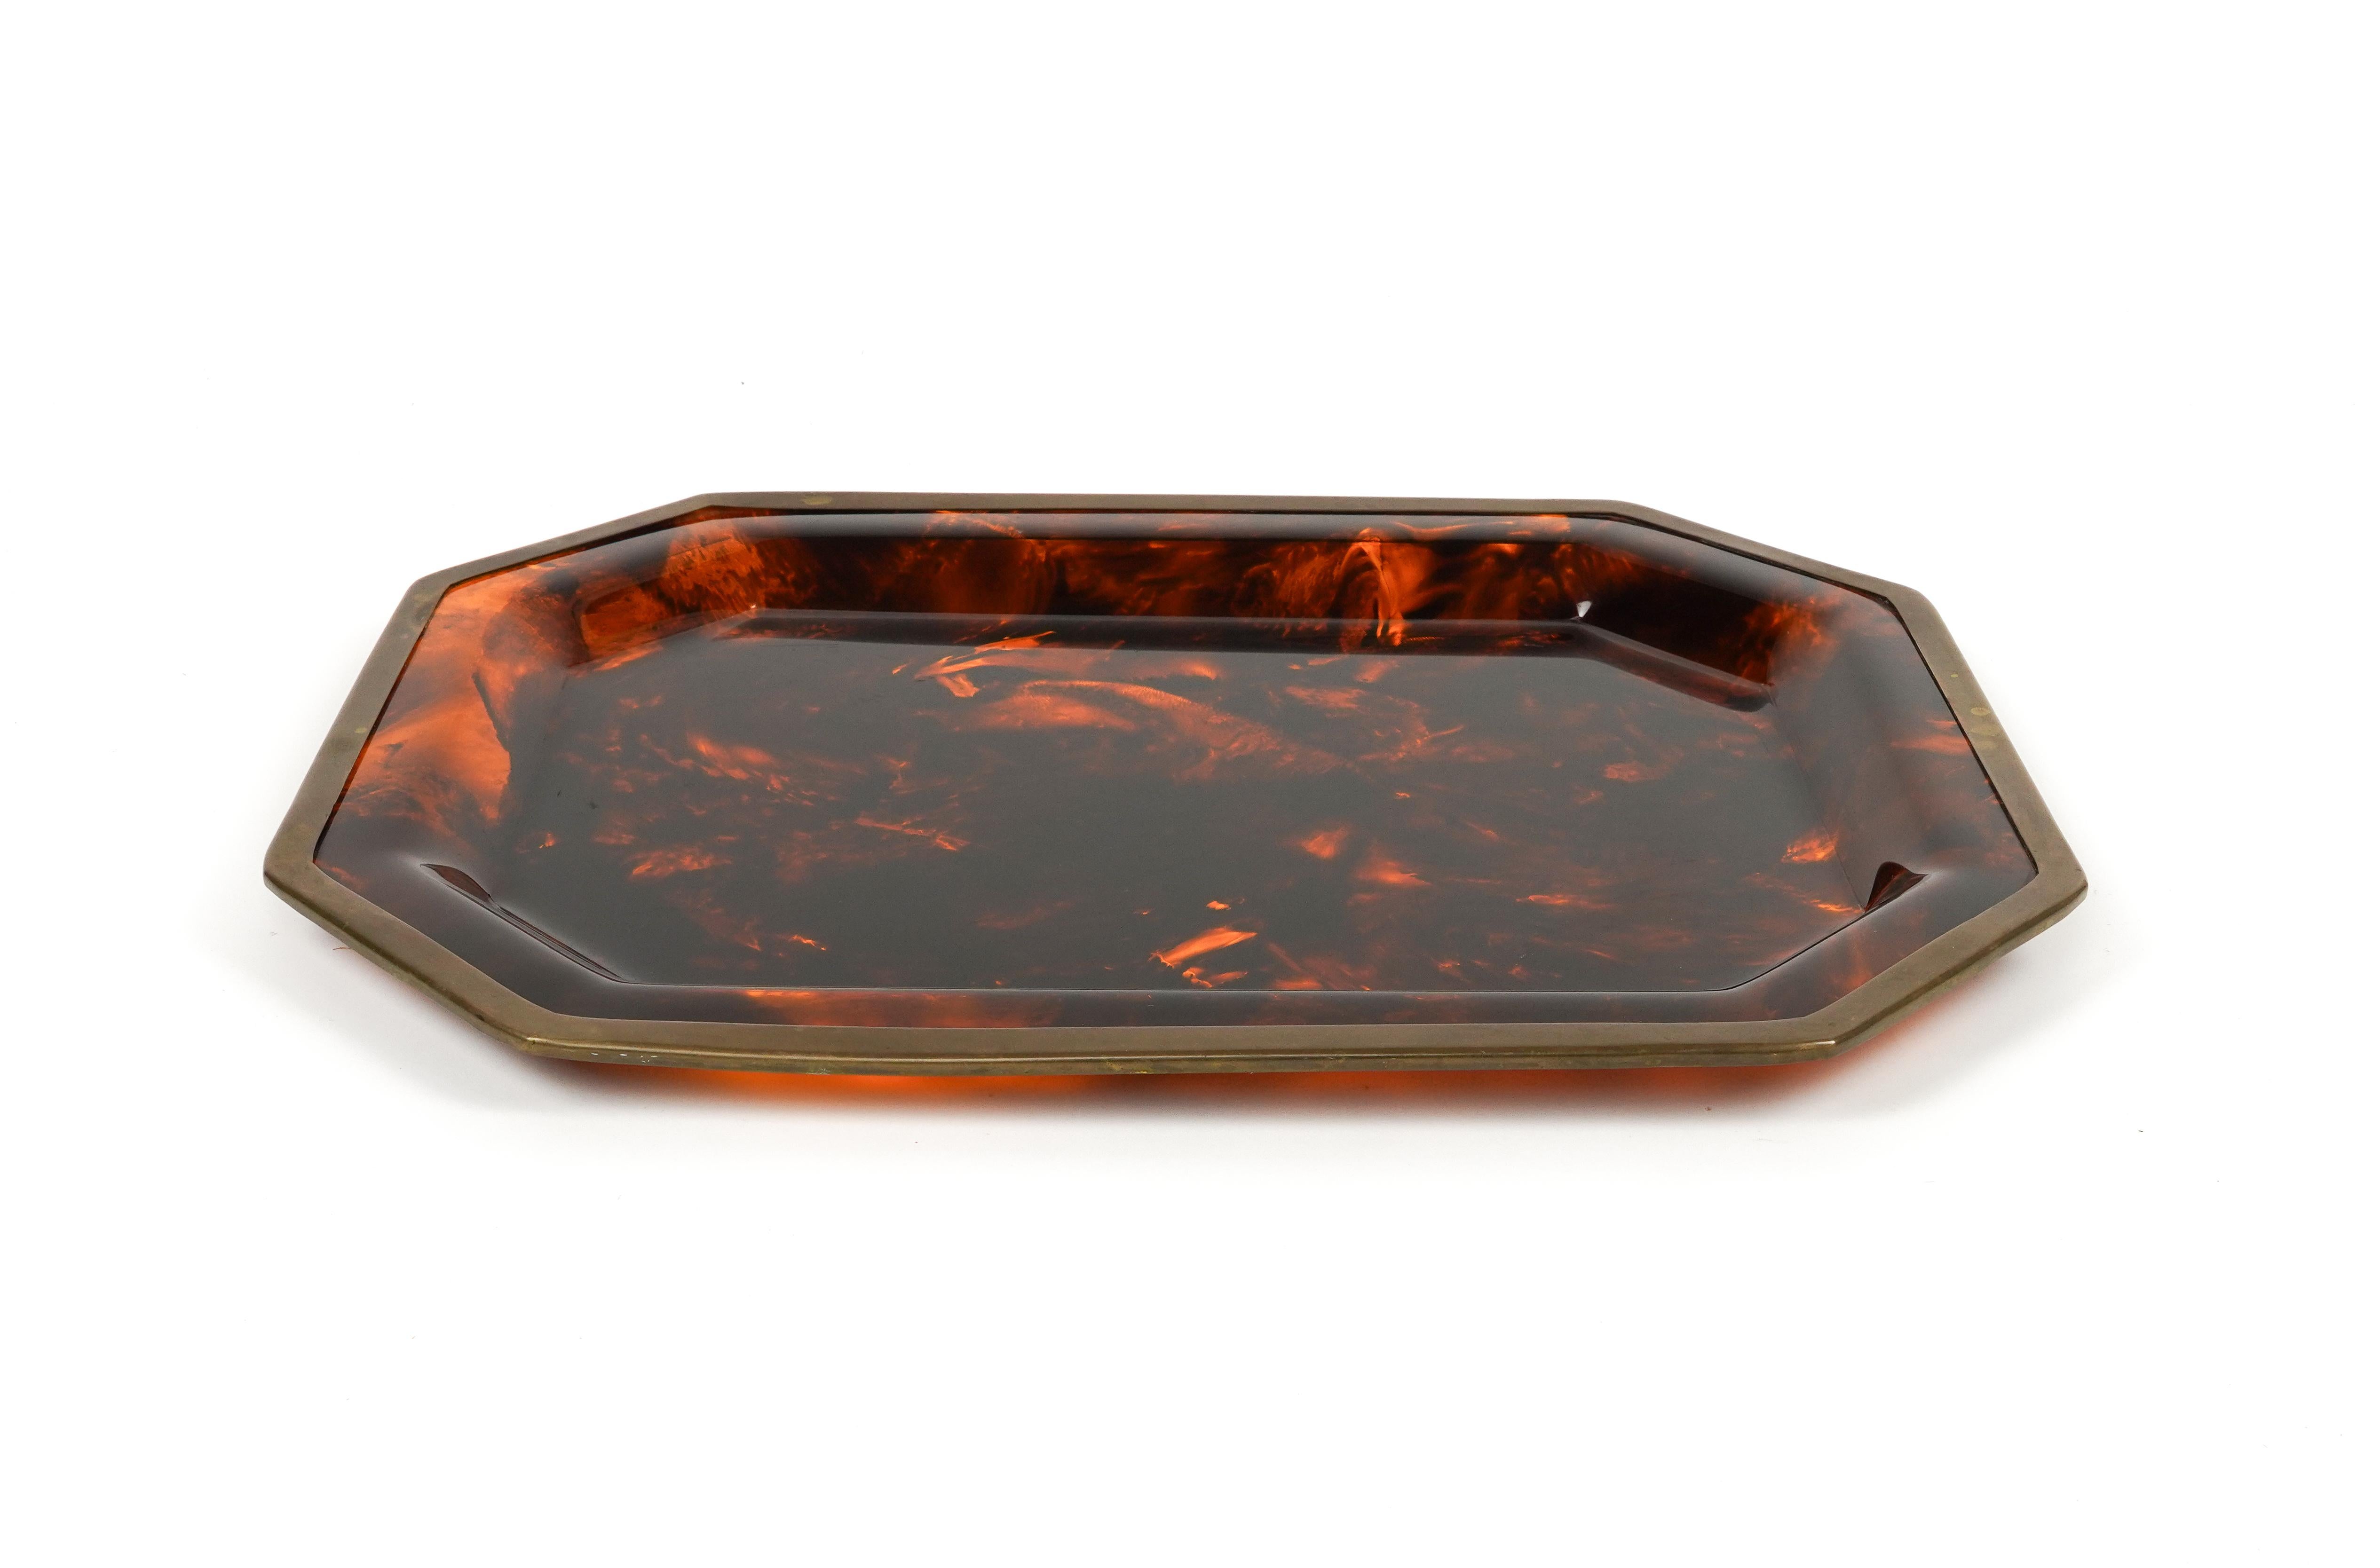 Midcentury amazing large octagonal serving tray or vide-poche in tortoiseshell effect Lucite and brass borders in the style of Christian Dior.

Made in Italy in the 1970s.

Great accessory for any modern interior.